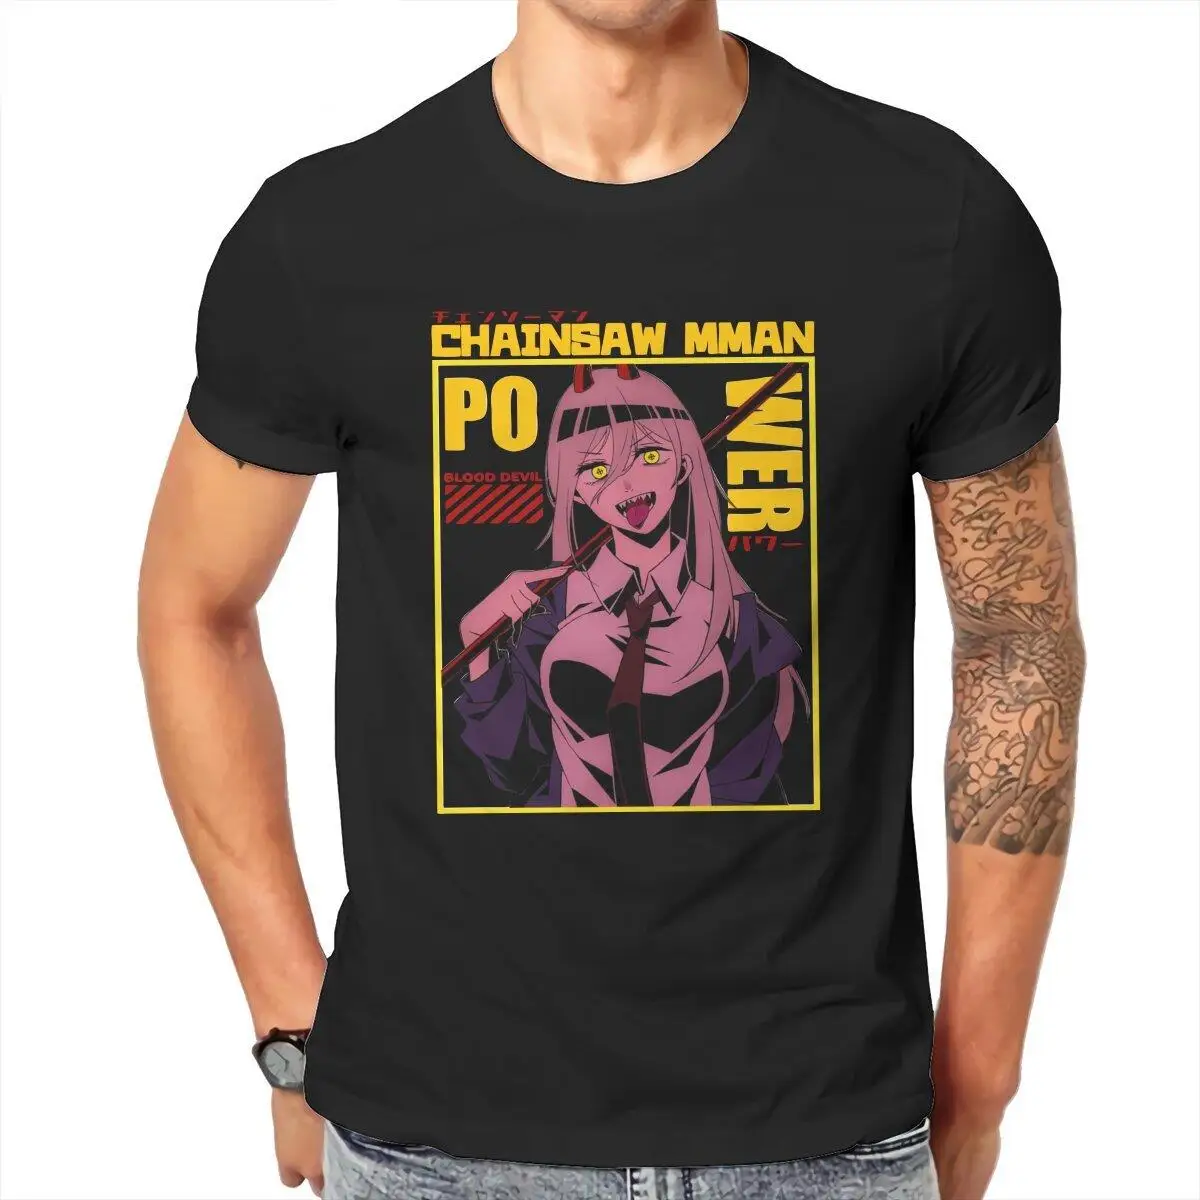 Power Chainsaw Man  T Shirts for Men Cotton Funny T-Shirts Round Neck  Tee Shirt Short Sleeve Tops Classic